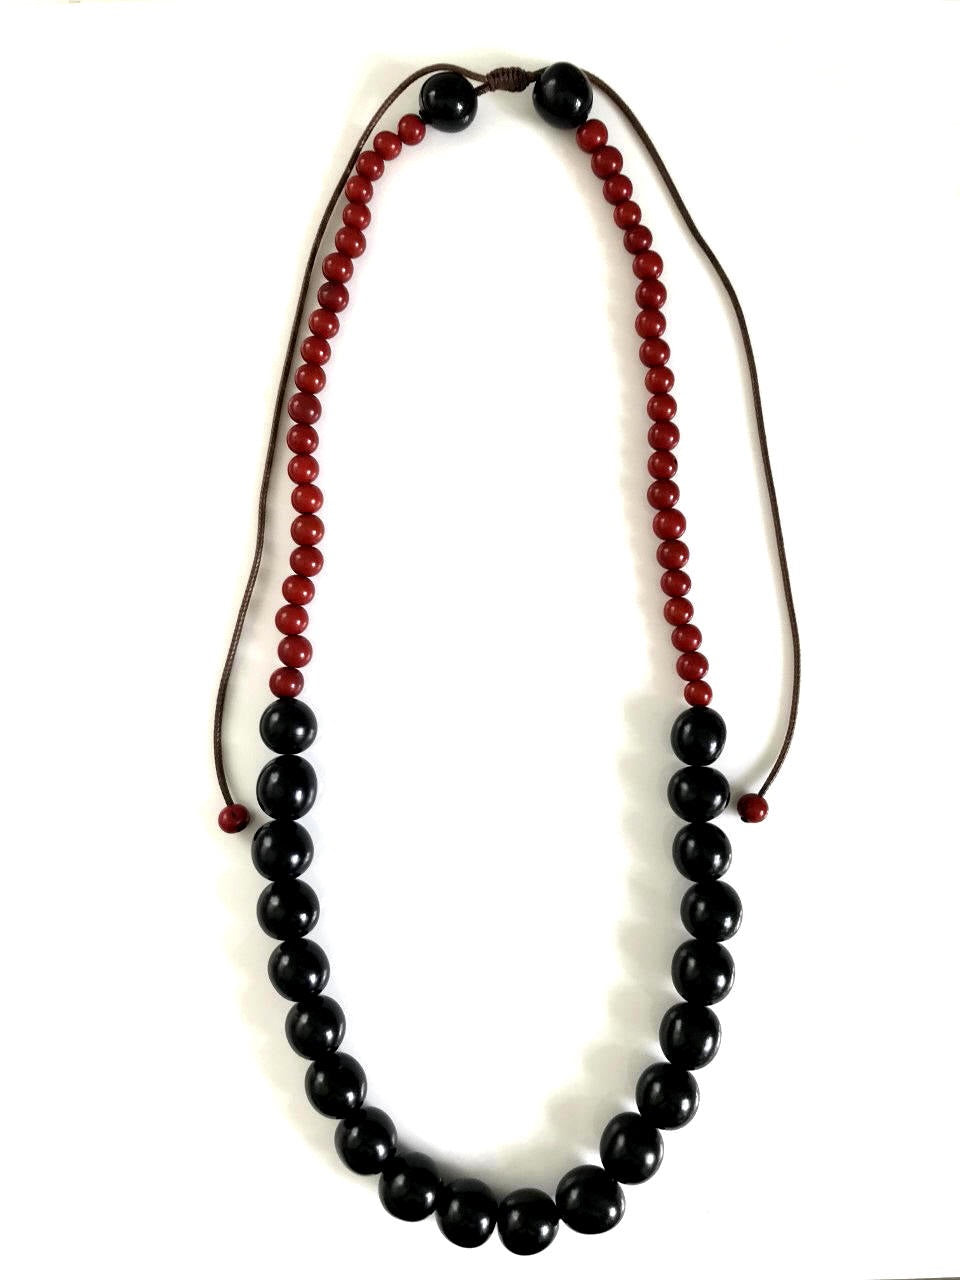 Coqueta necklace - Red and Black